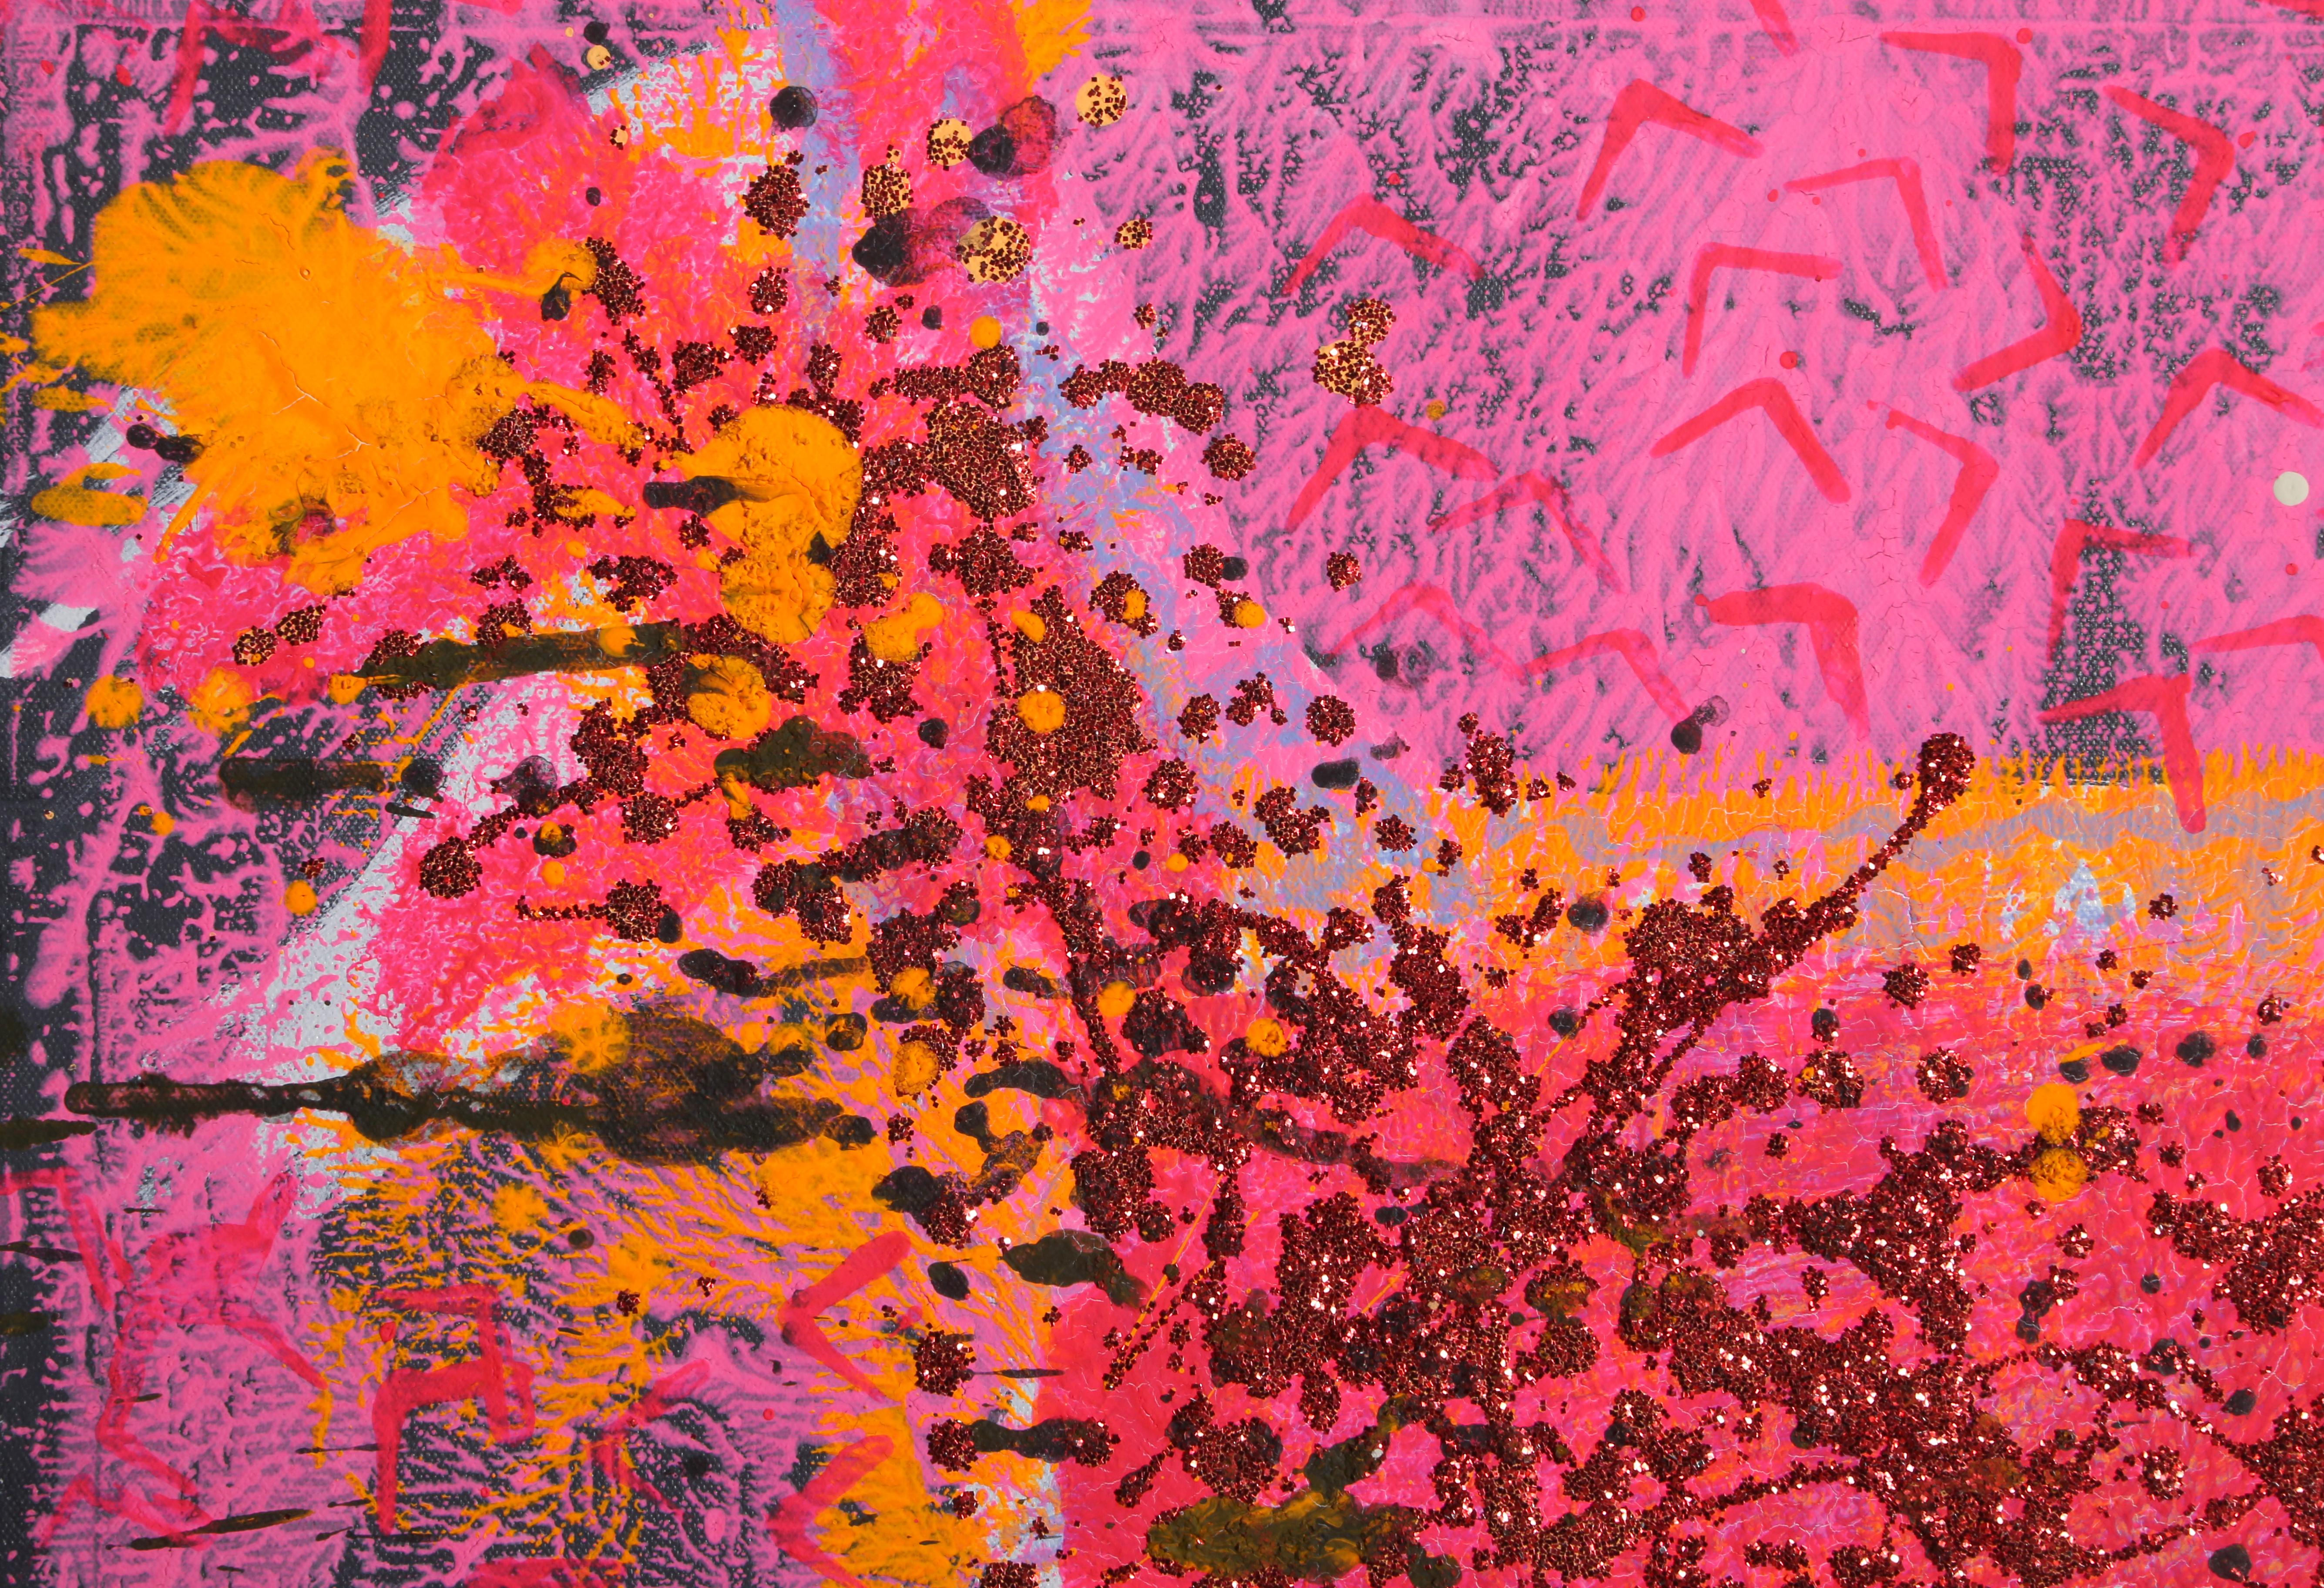 Dog (Orange on Pink and Black) - Painting by Peter Mayer